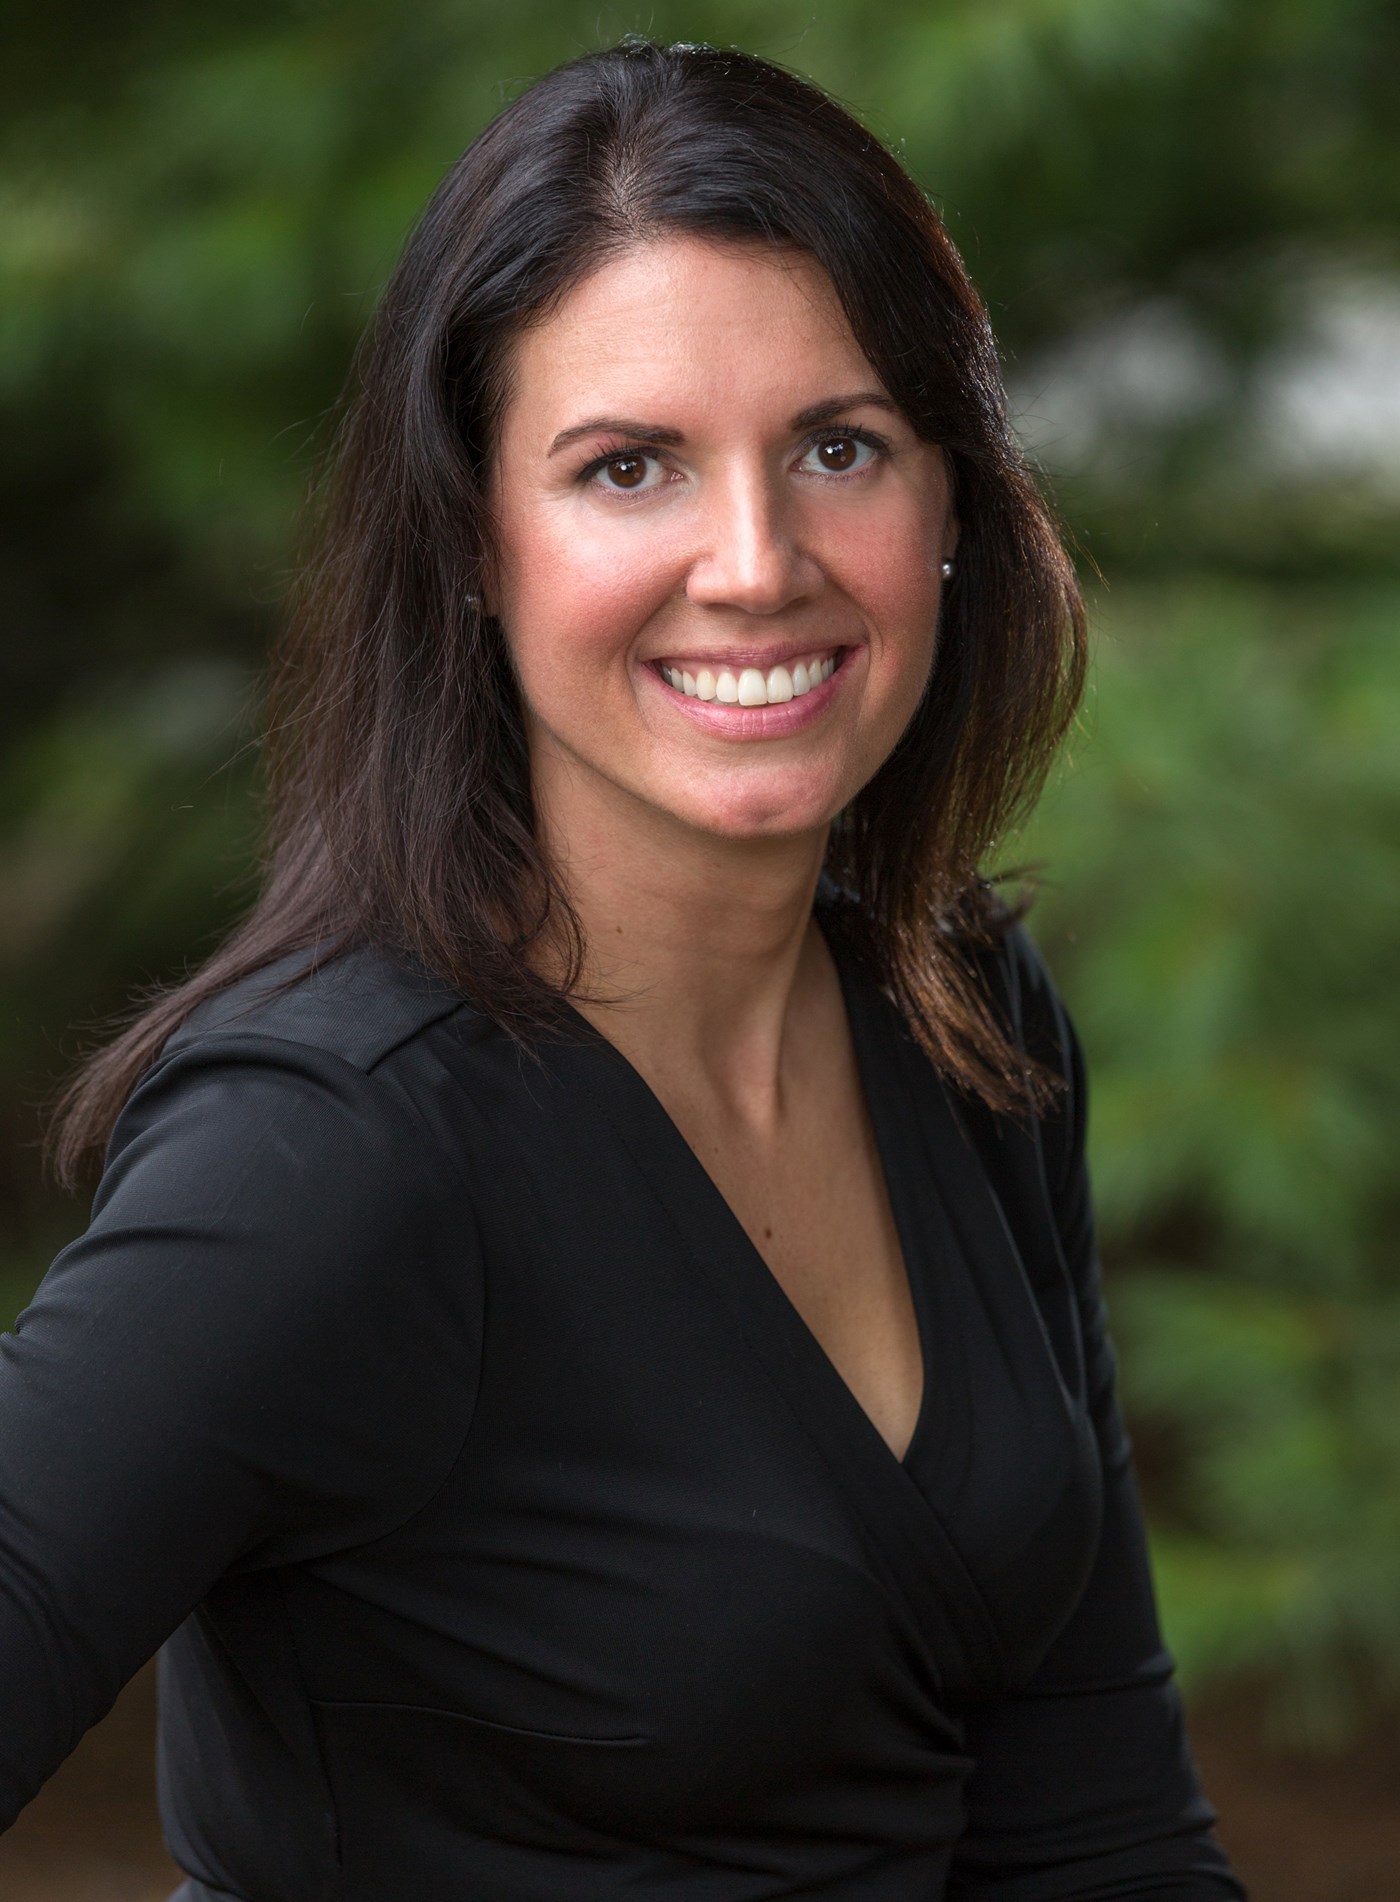 Sabrina Noel Feldeisen is an Assistant Professor, Director for Community Engagement, Center for Population Health, UMOVE Center Researcher in the Biomedical and Nutritional Sciences, Center for Population Health, UMOVE Departments at UMass Lowell.